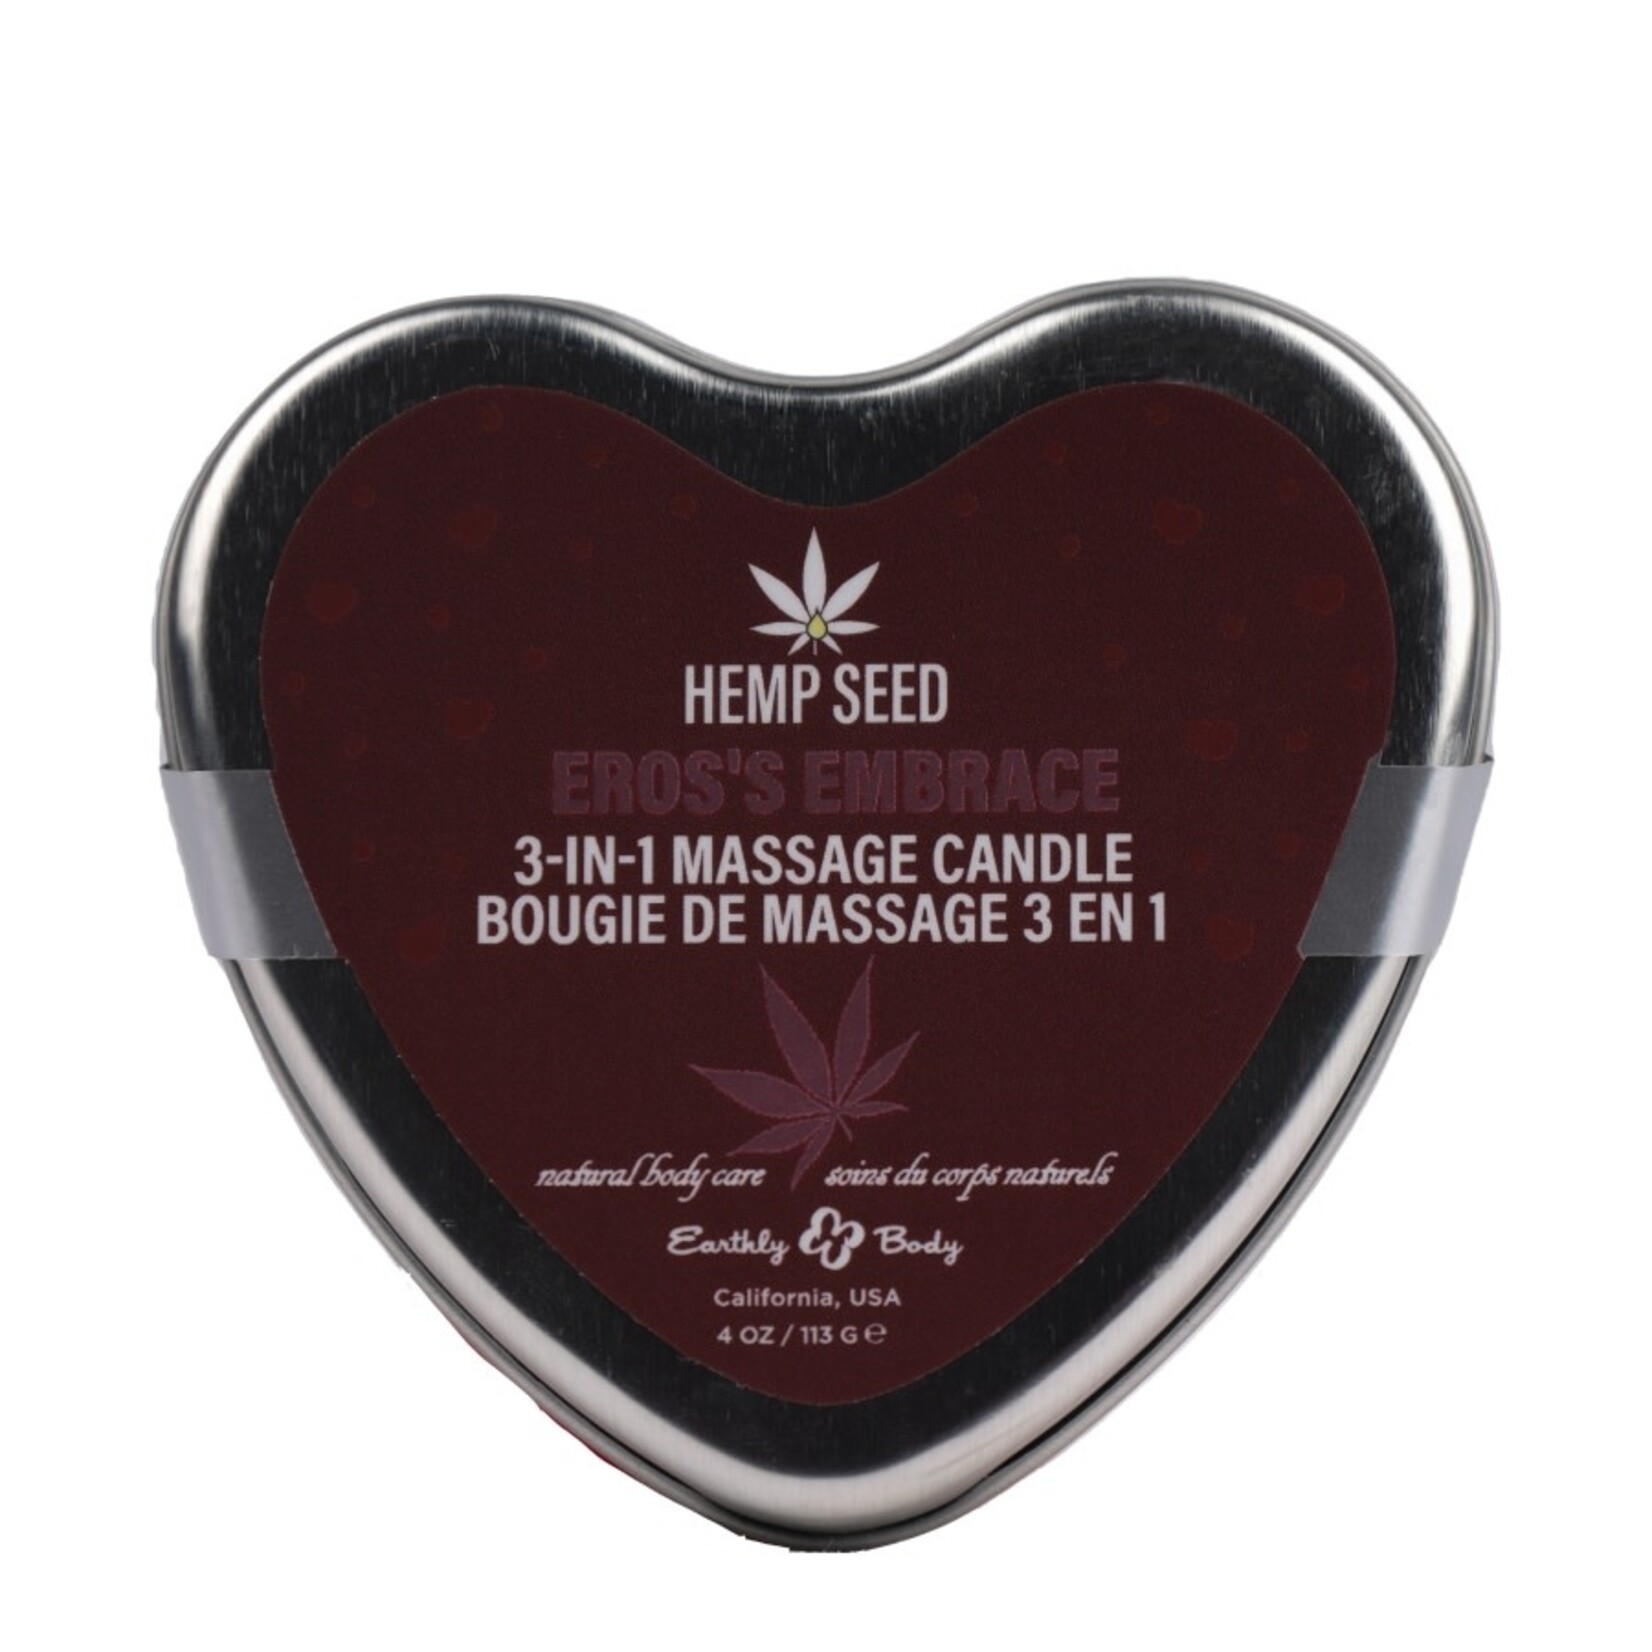 EARTHLY BODY HEMP SEED 3-IN-1 VALENTINES DAY CANDLE 4OZ/113G ERO'S EMBRACE